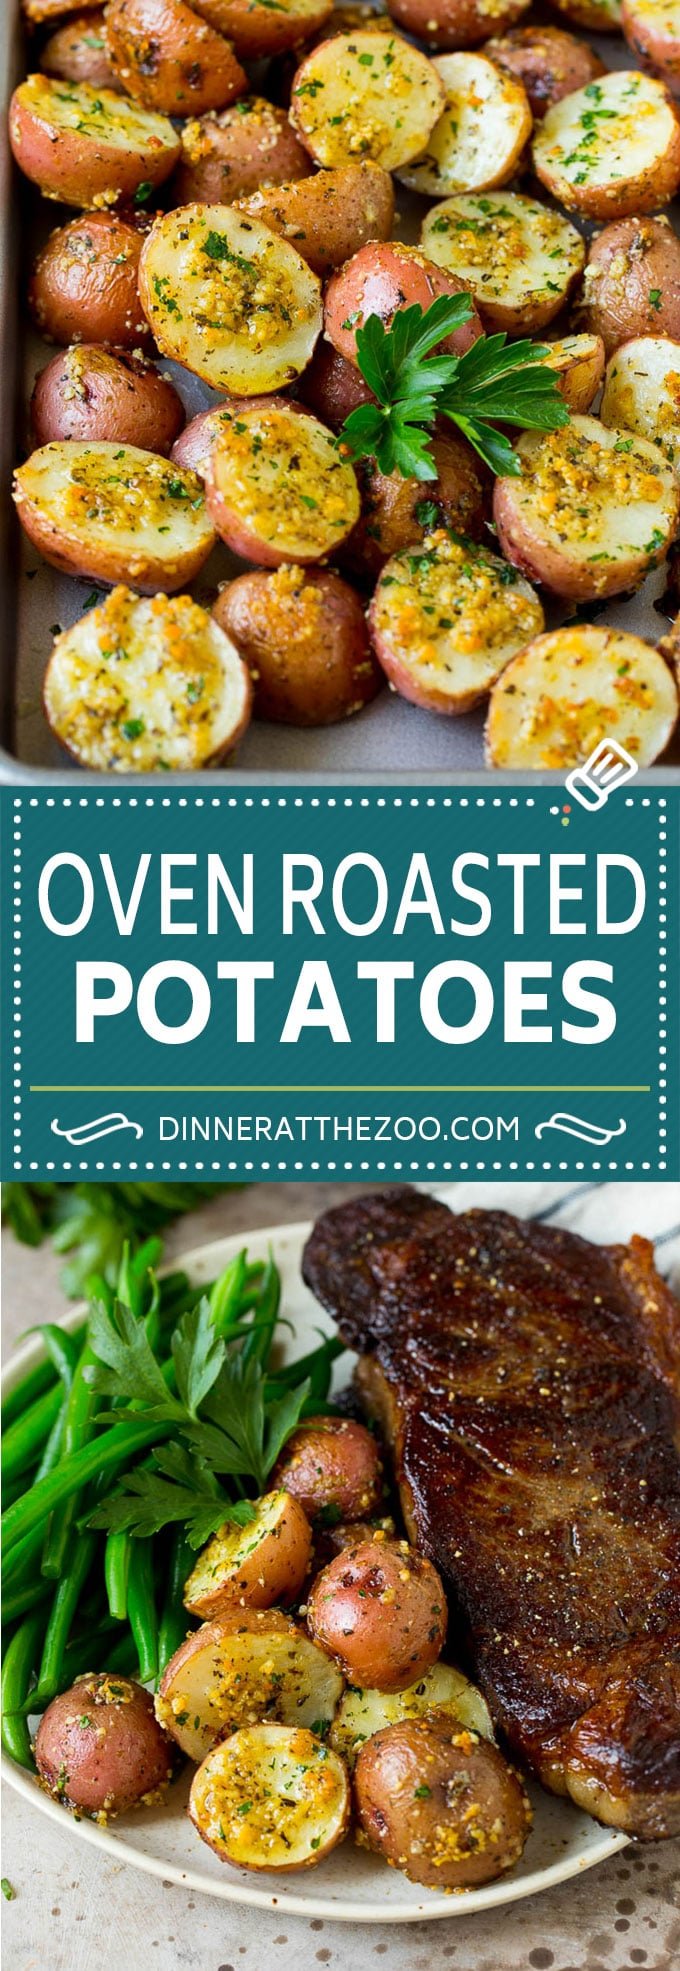 These oven roasted potatoes are baby potatoes coated in olive oil, garlic, herbs and parmesan cheese, then baked until golden brown and crispy.